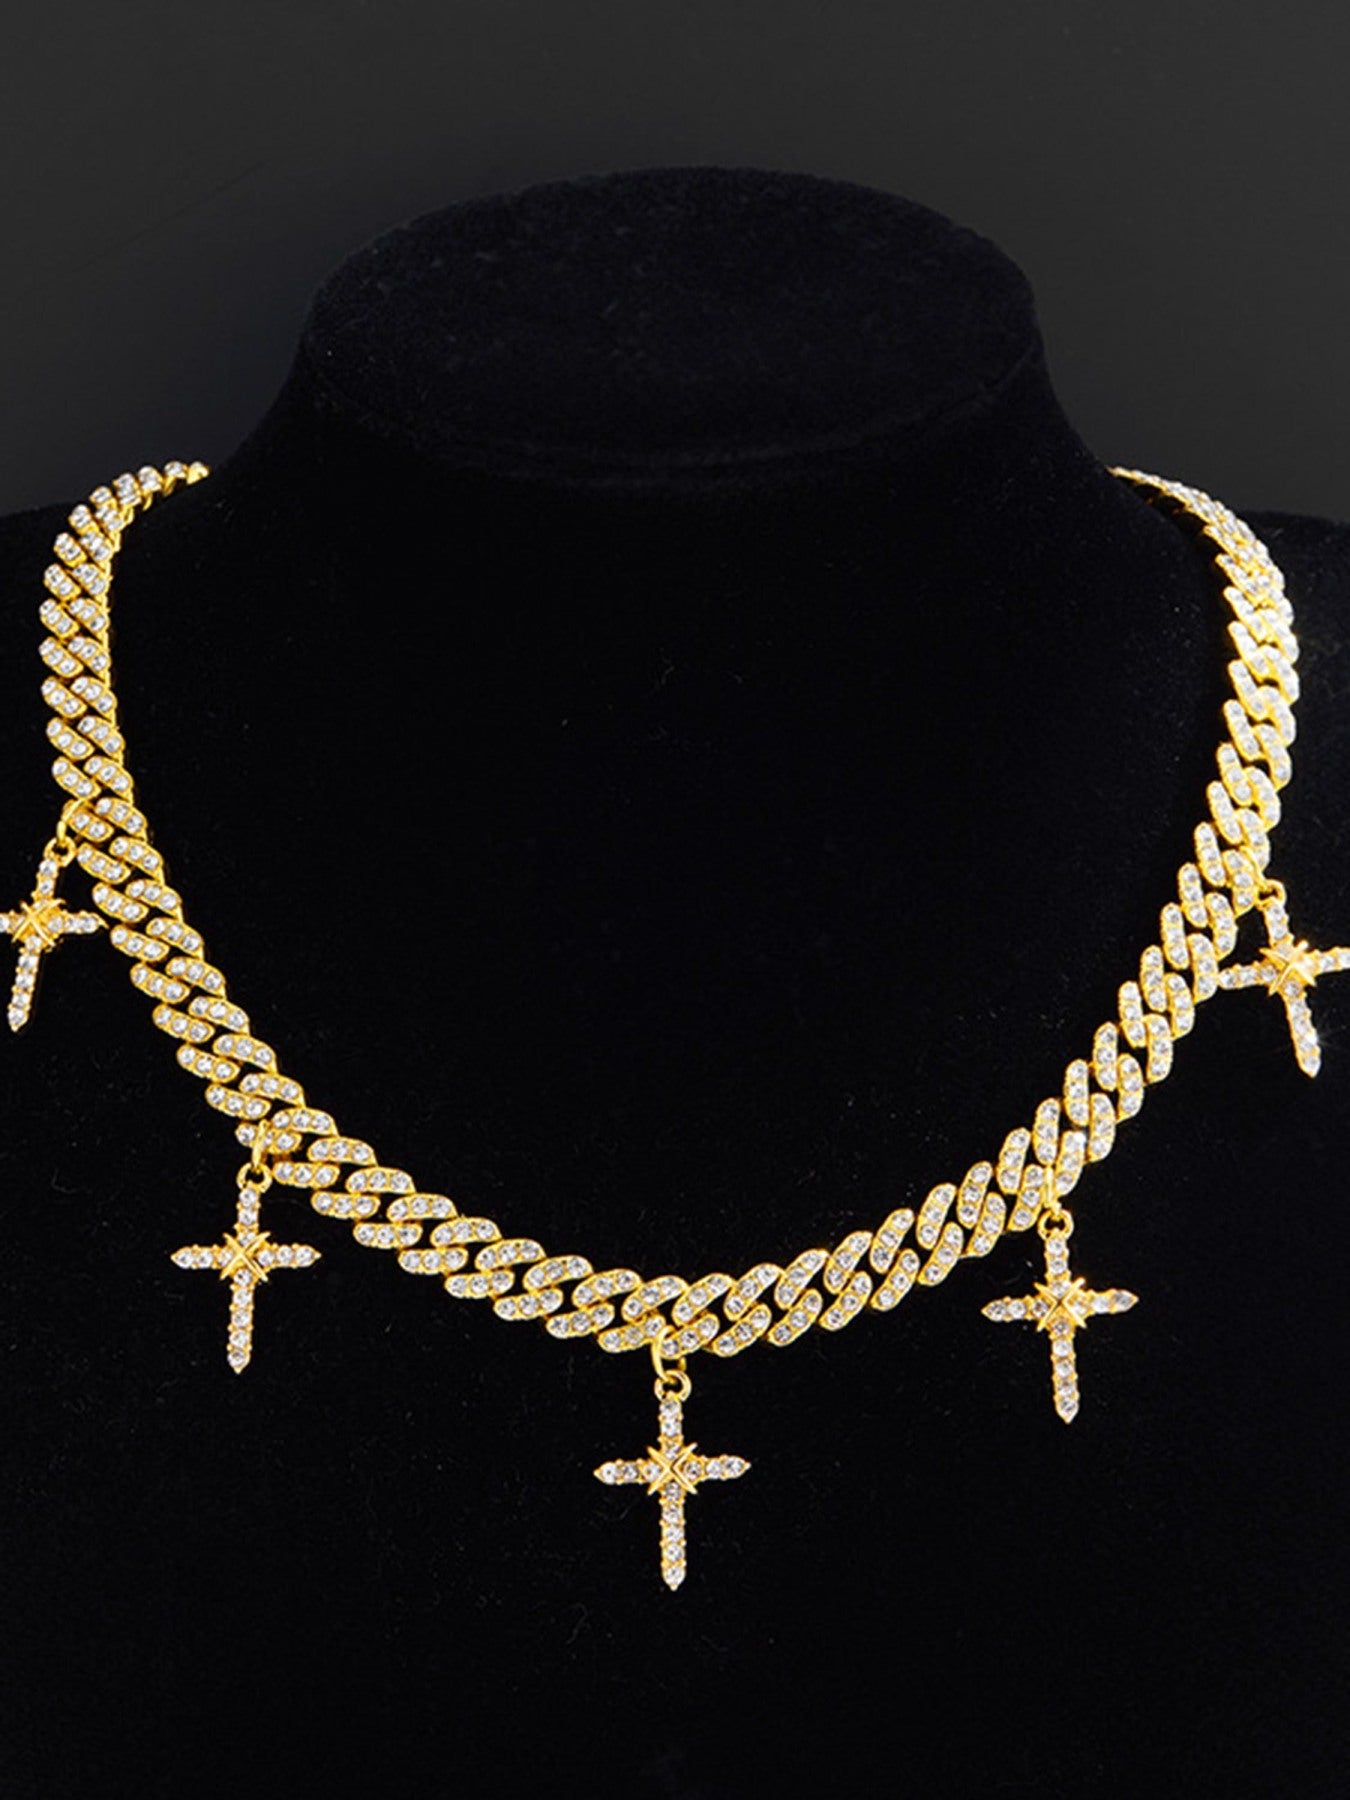 The Supermade Cross Necklace - 1688